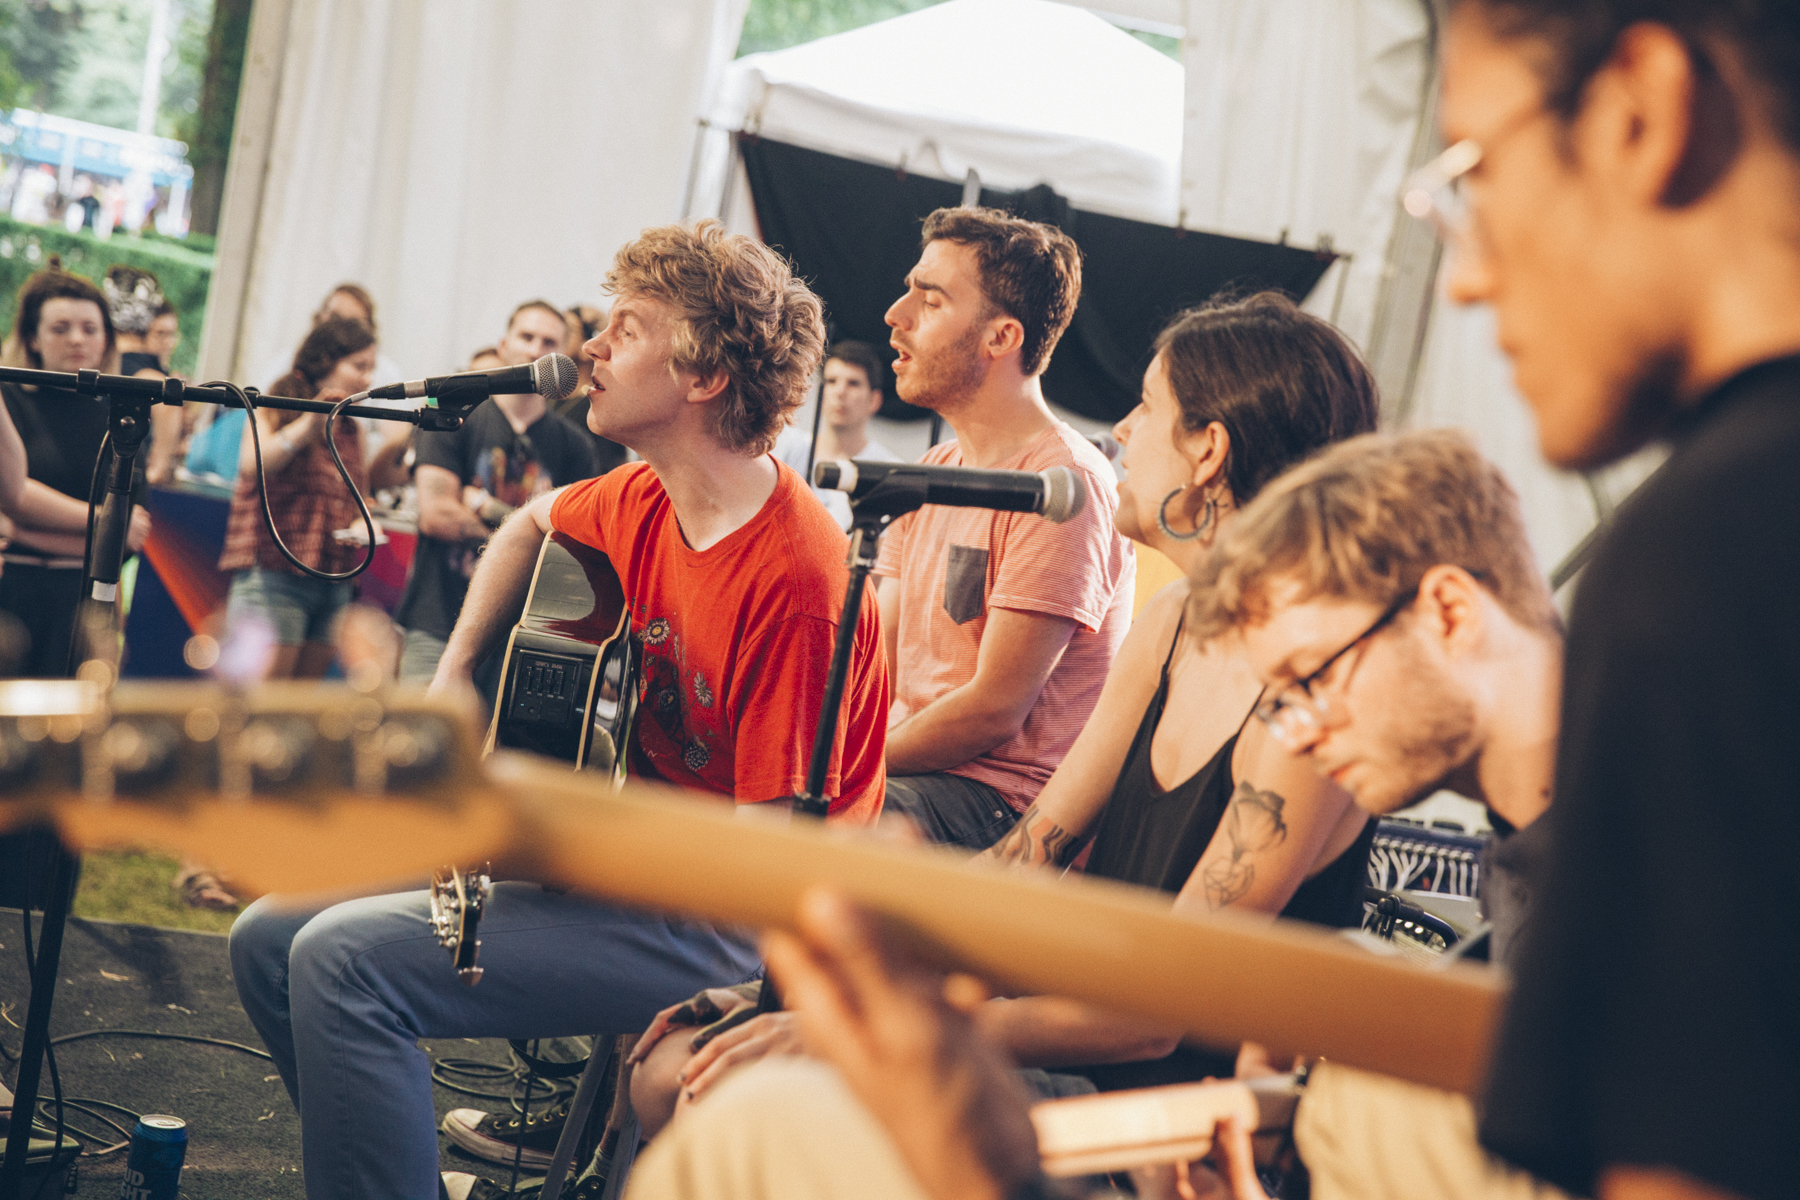 SPIN at Lollapalooza 2016: Day 1 at Toyota Music Den with Sunflower Bean, Pinegrove and More